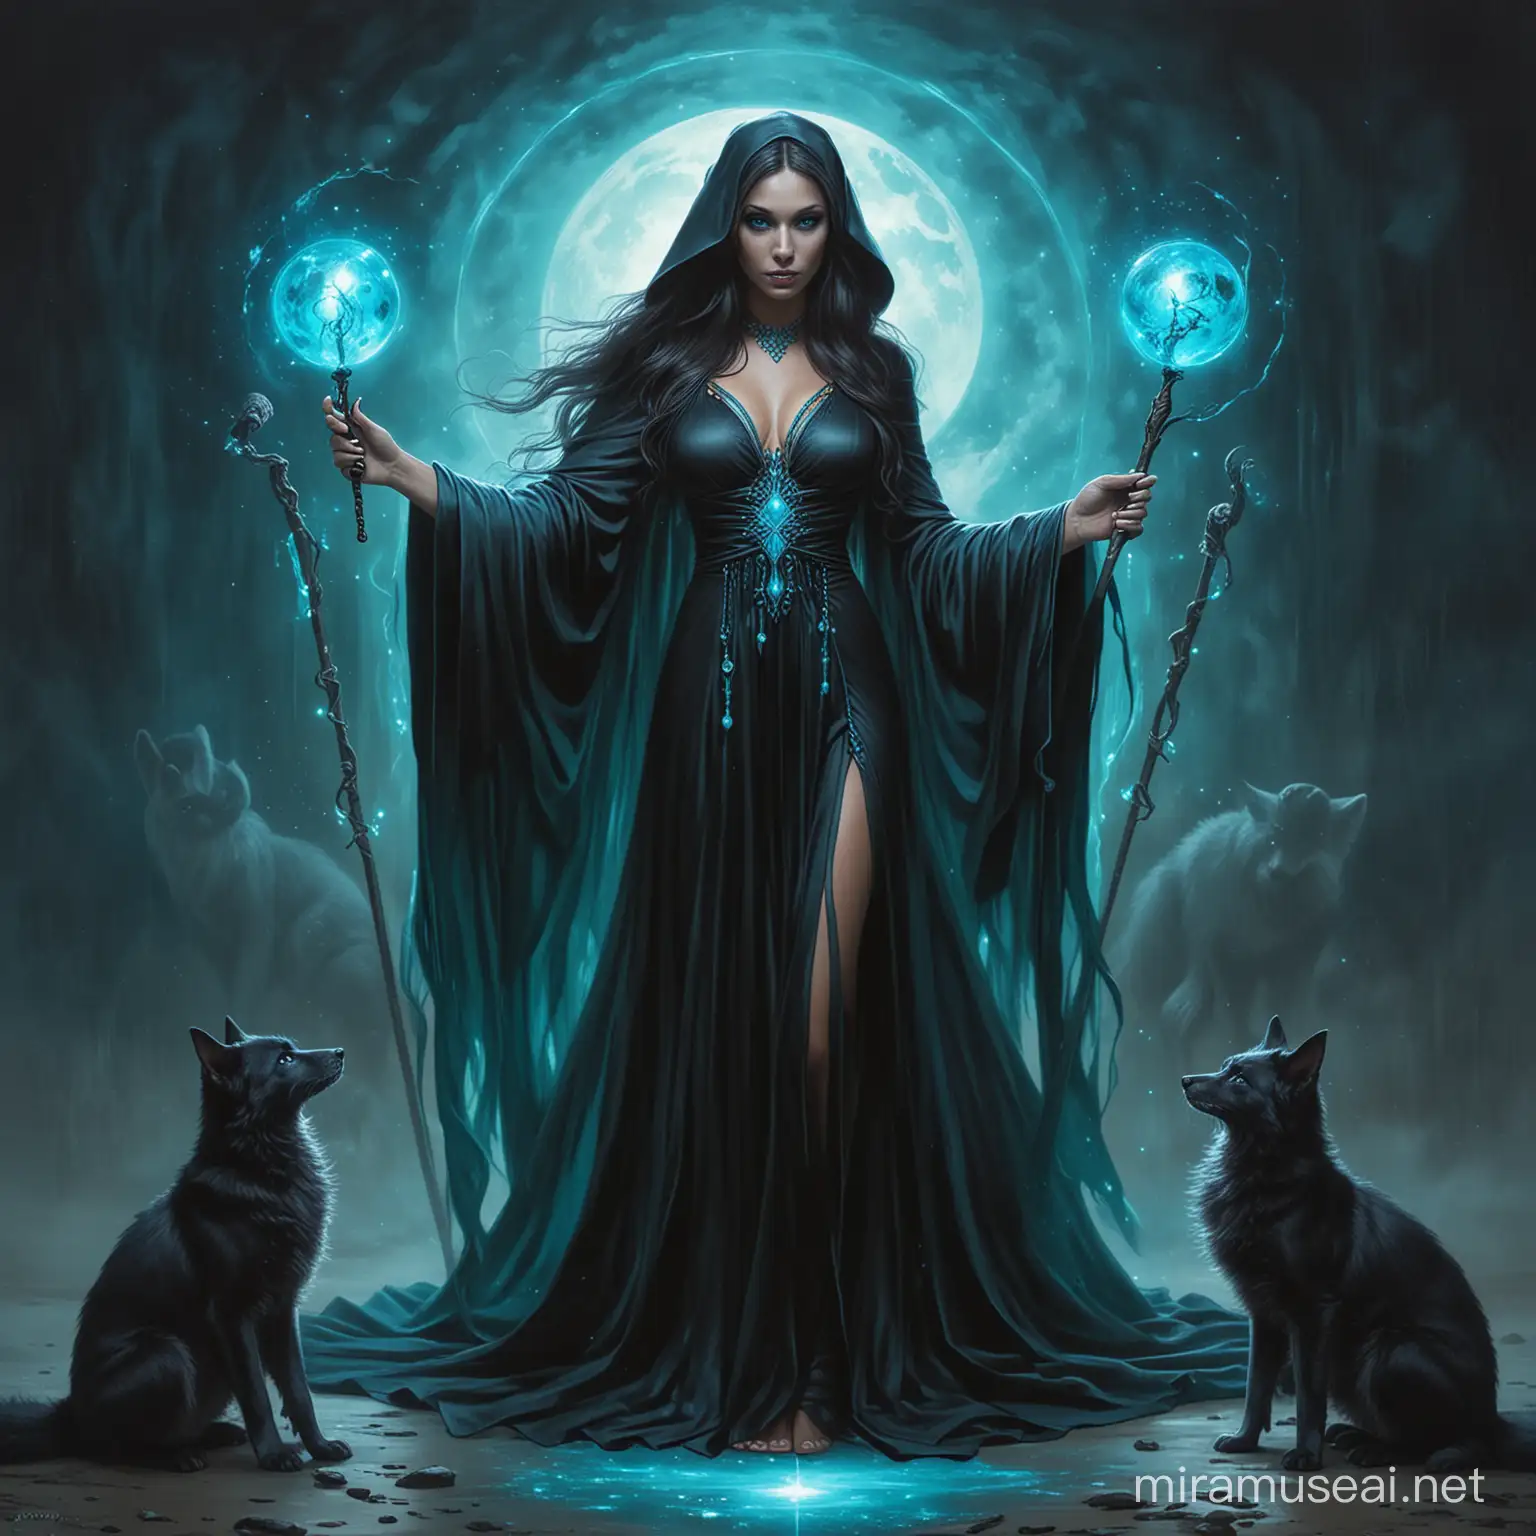 Goddess of dark magic. Wearing a long flowing black robe. Holding a staff in one hand and an orb of turquoise blue light on the other. Surrounded by three vixens